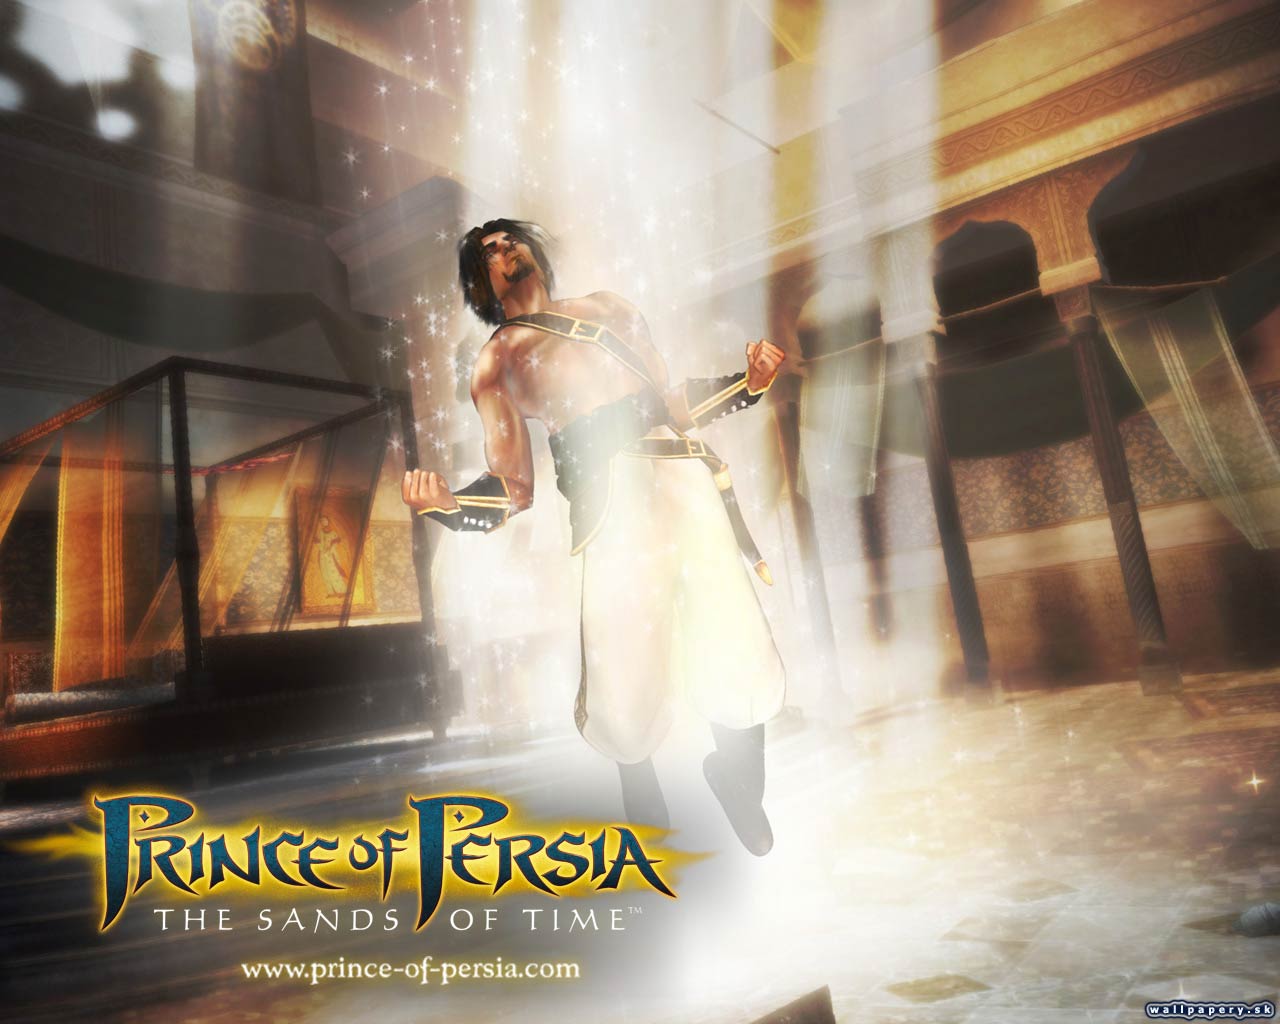 Prince of Persia: The Sands of Time - wallpaper 15